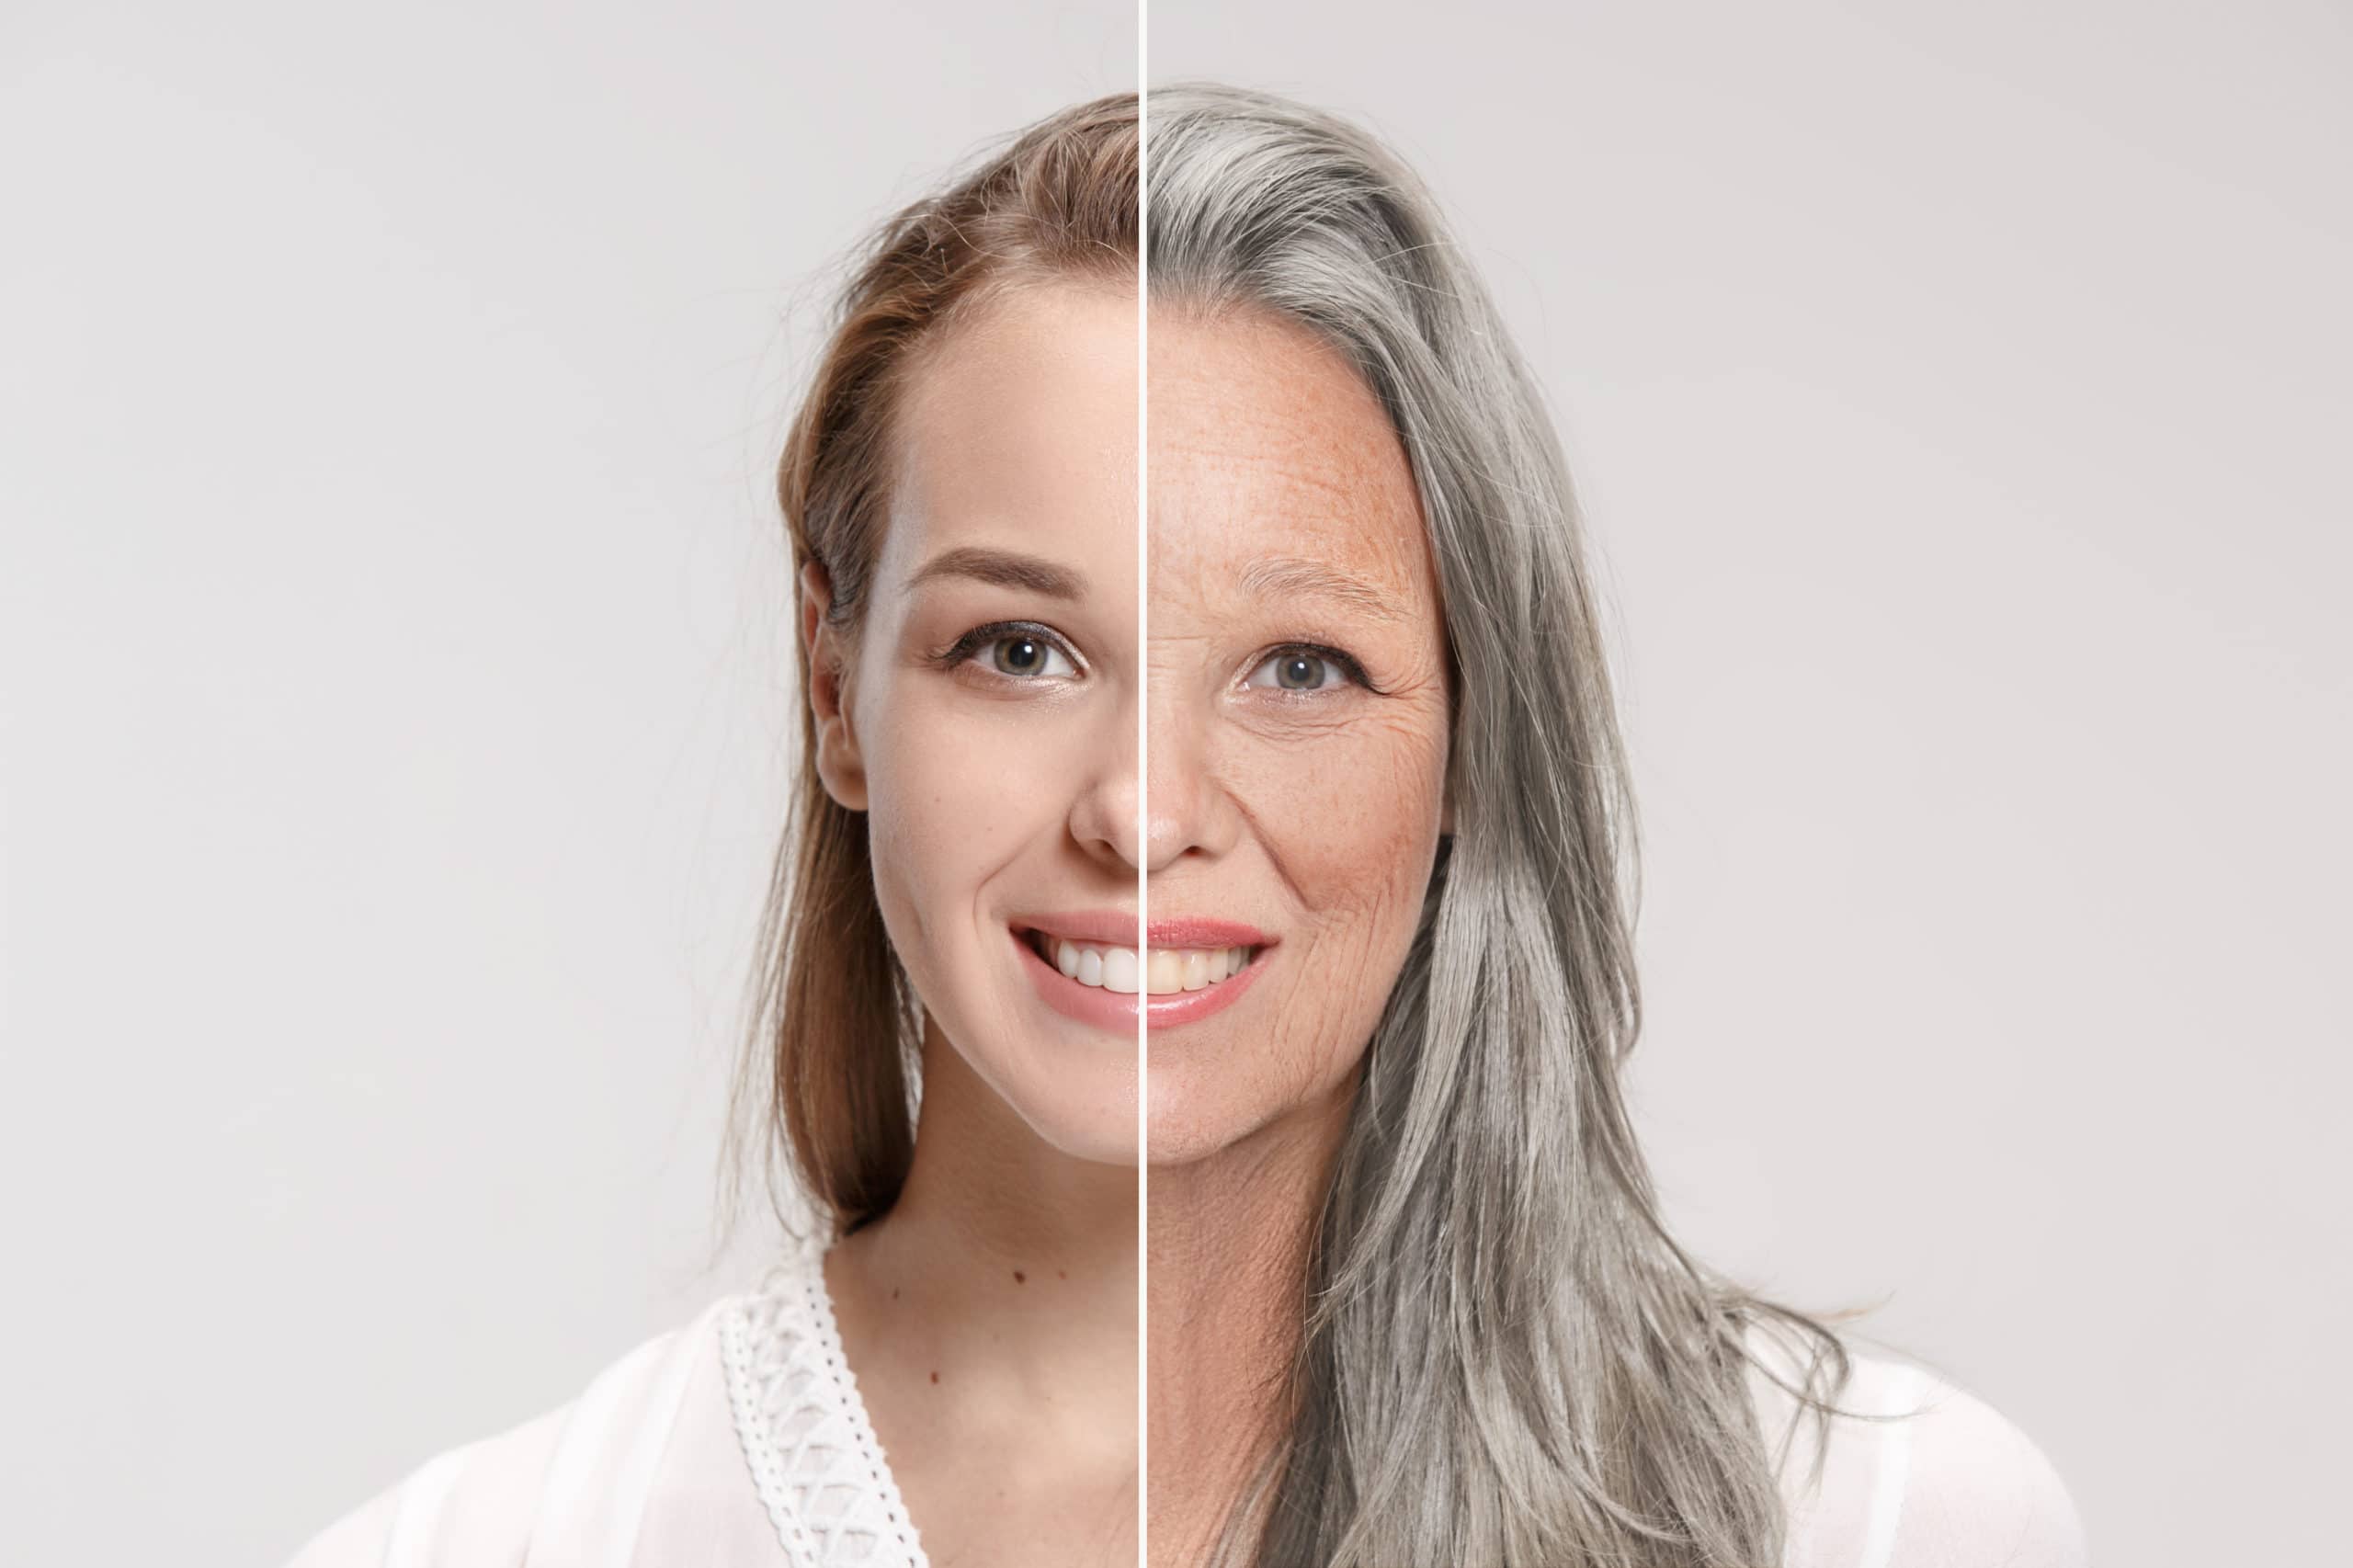 Comparison Portrait of beautiful woman with problem and clean skin, aging and youth concept, beauty treatment